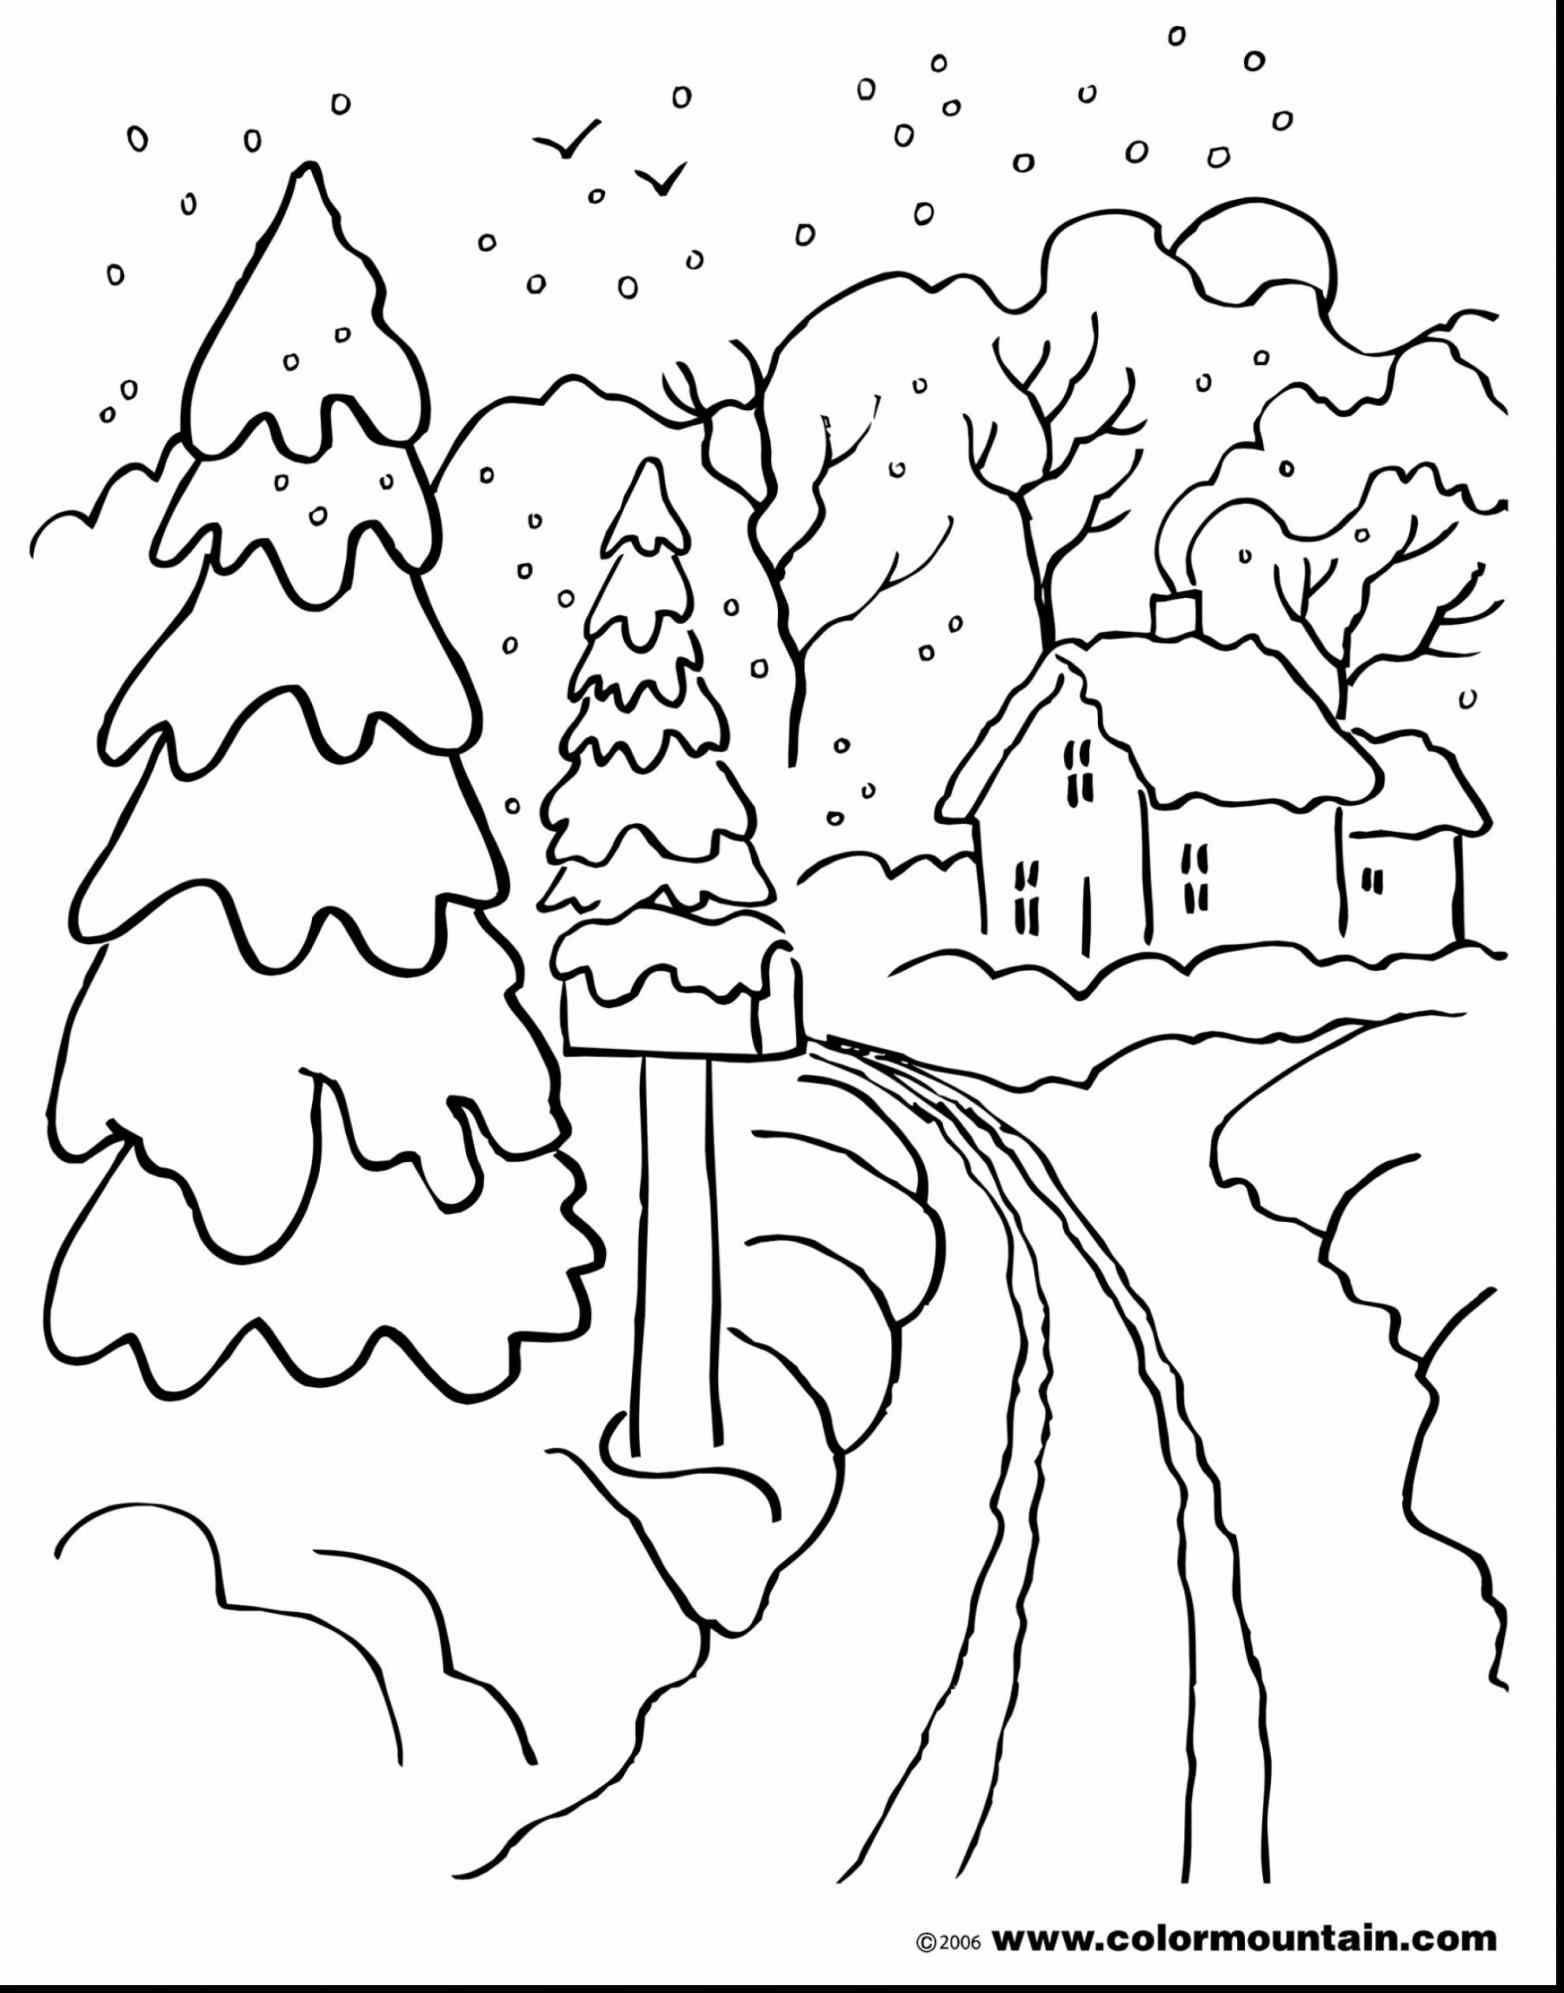 Free Coloring Pages Landscapes Printables At GetColorings Free Printable Colorings Pages